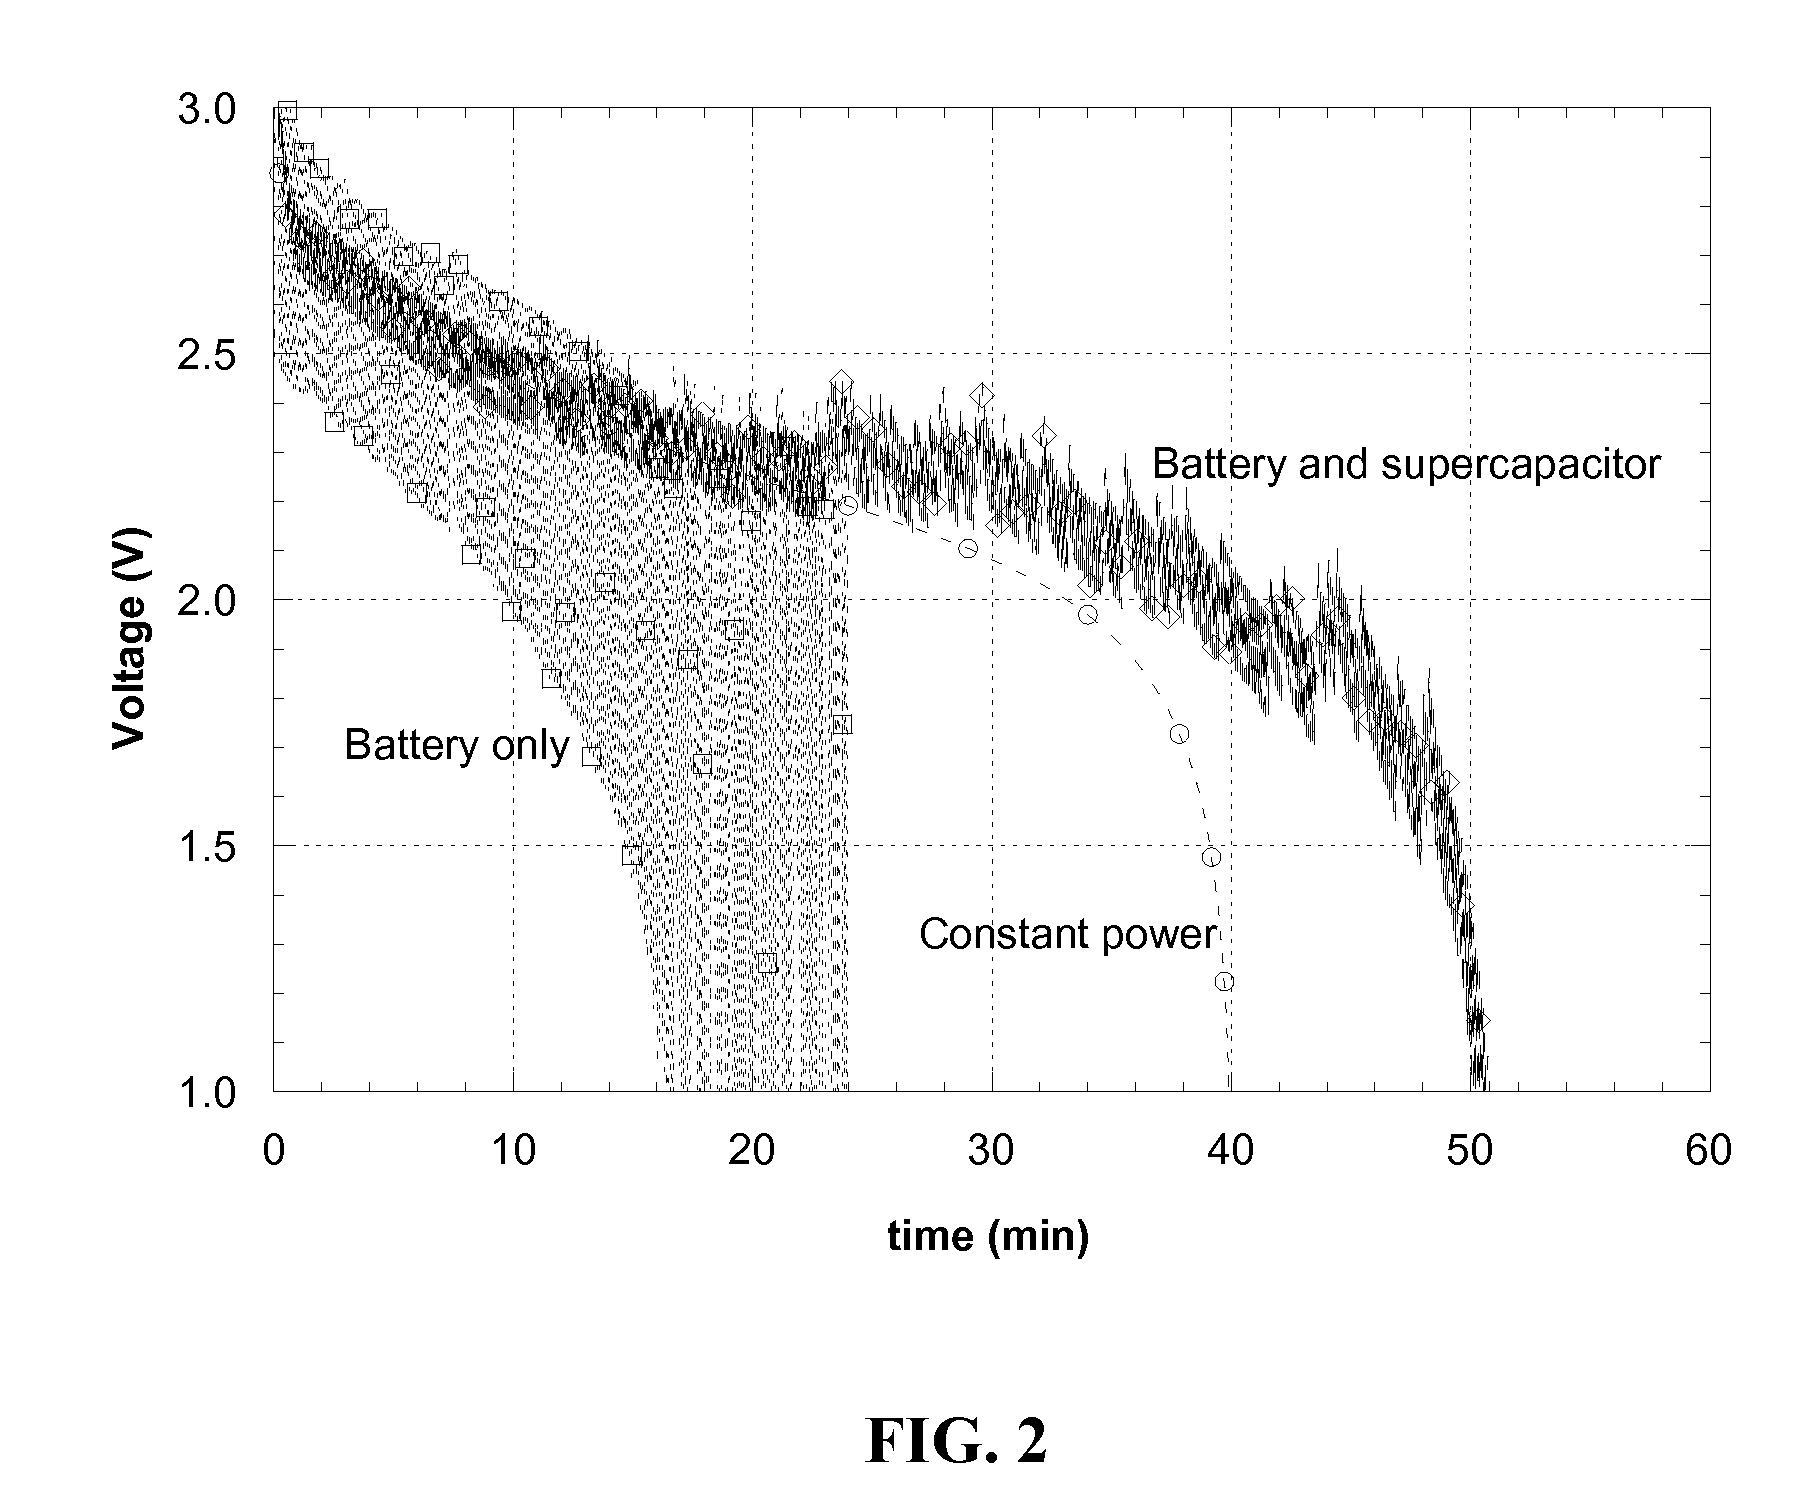 System for Energy Harvesting and/or Generation, Storage, and Delivery